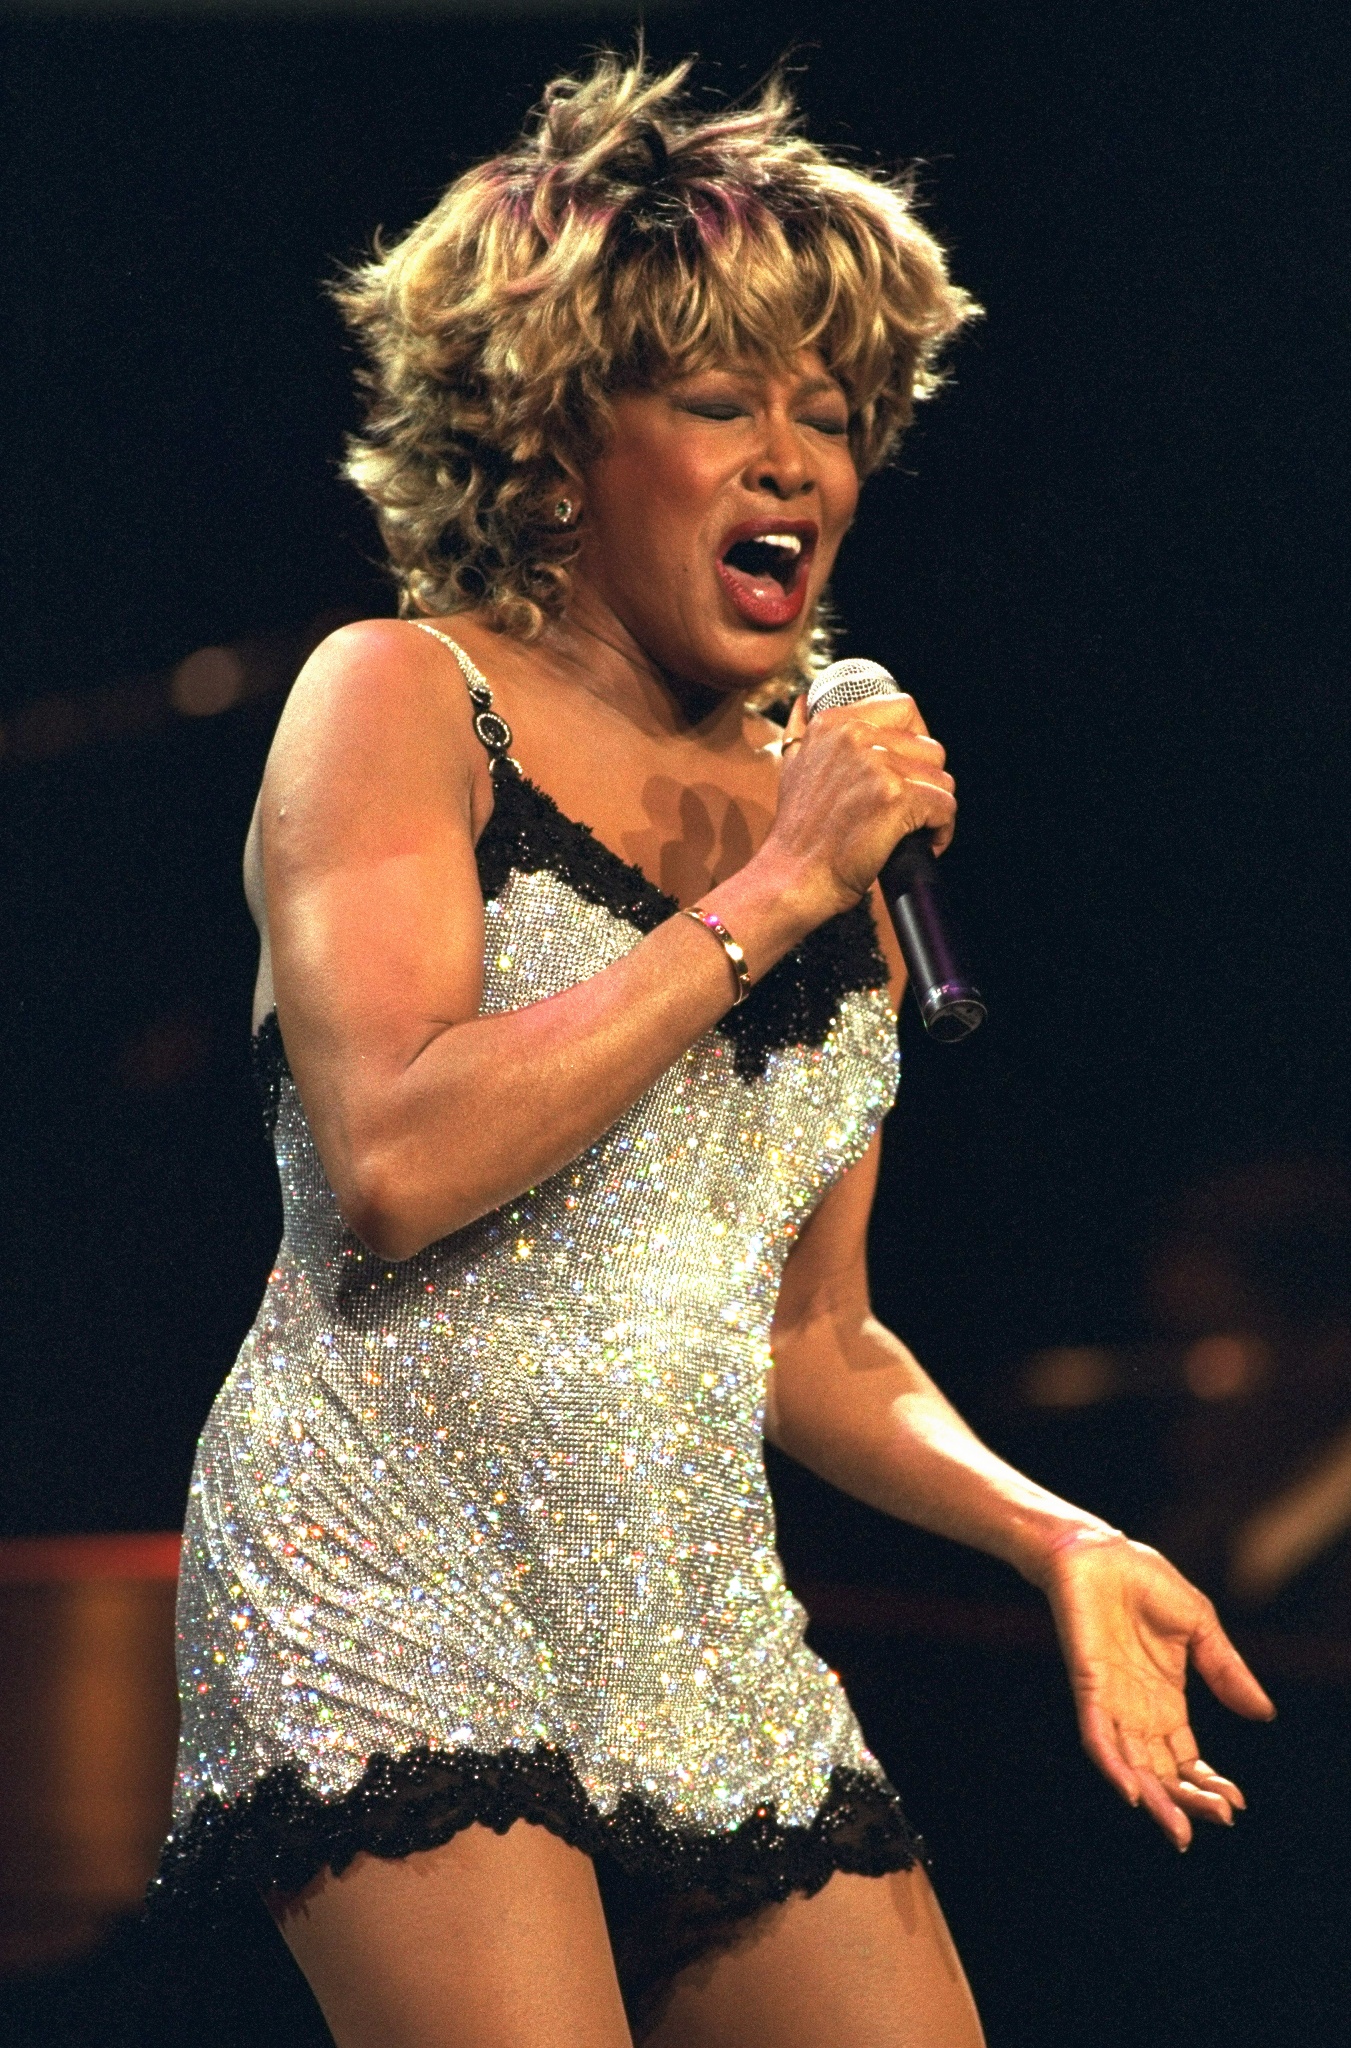 Tina Turner at Radio City Music Hall in 2000 | Source: Getty Images